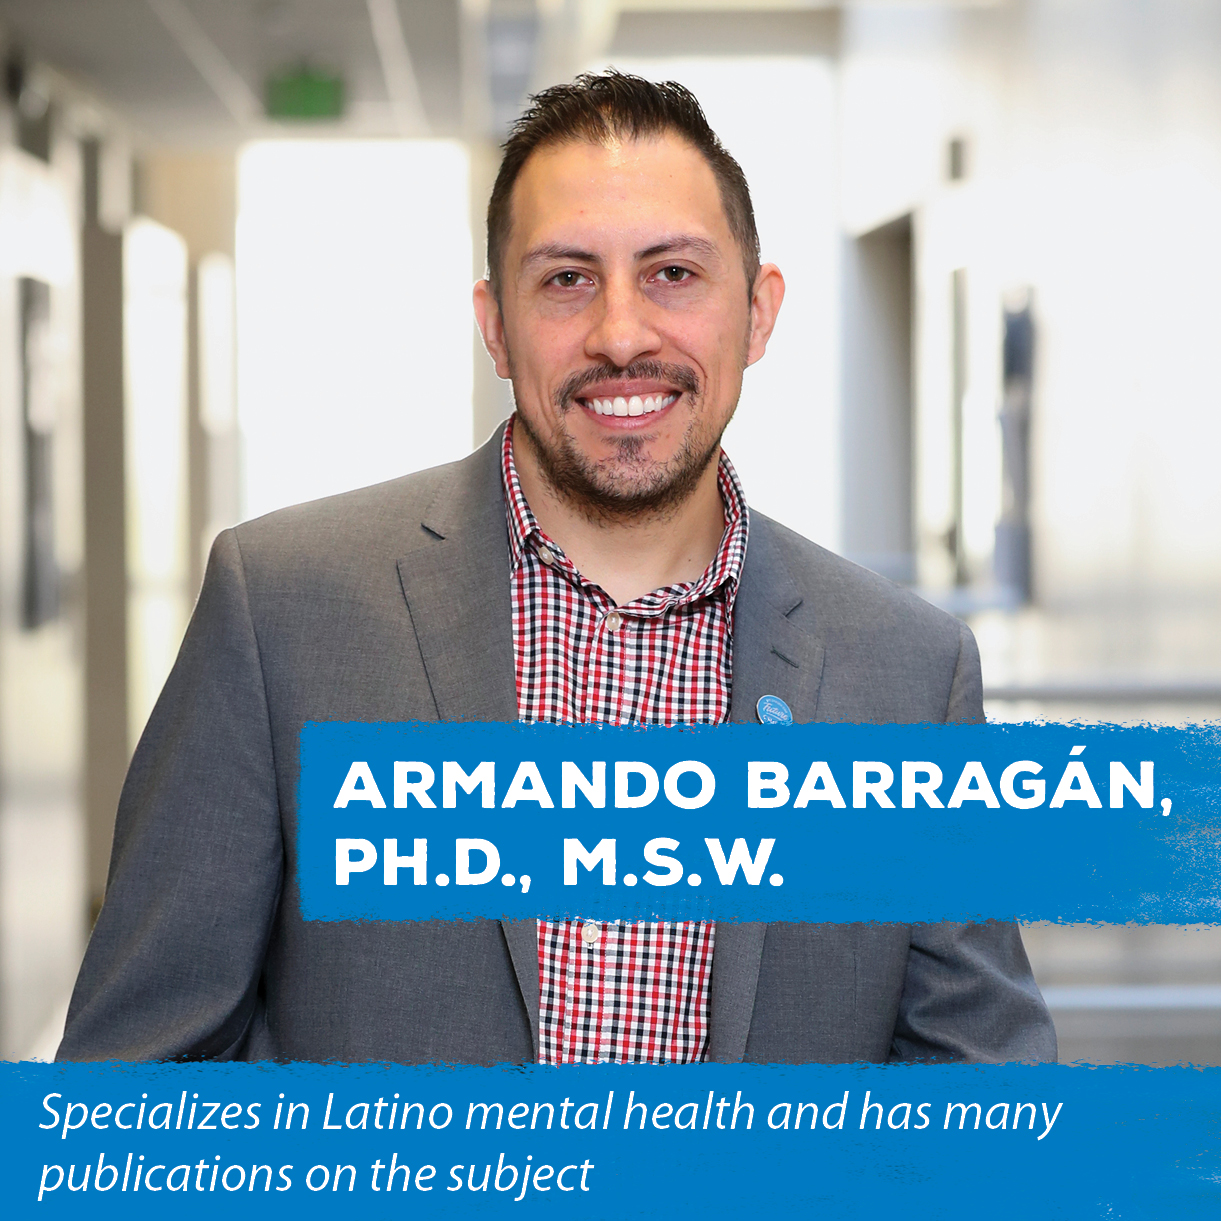 Armando Barragán, Ph.D., M.S.W. - Specializes in Latino mental health and has many publications on the subject